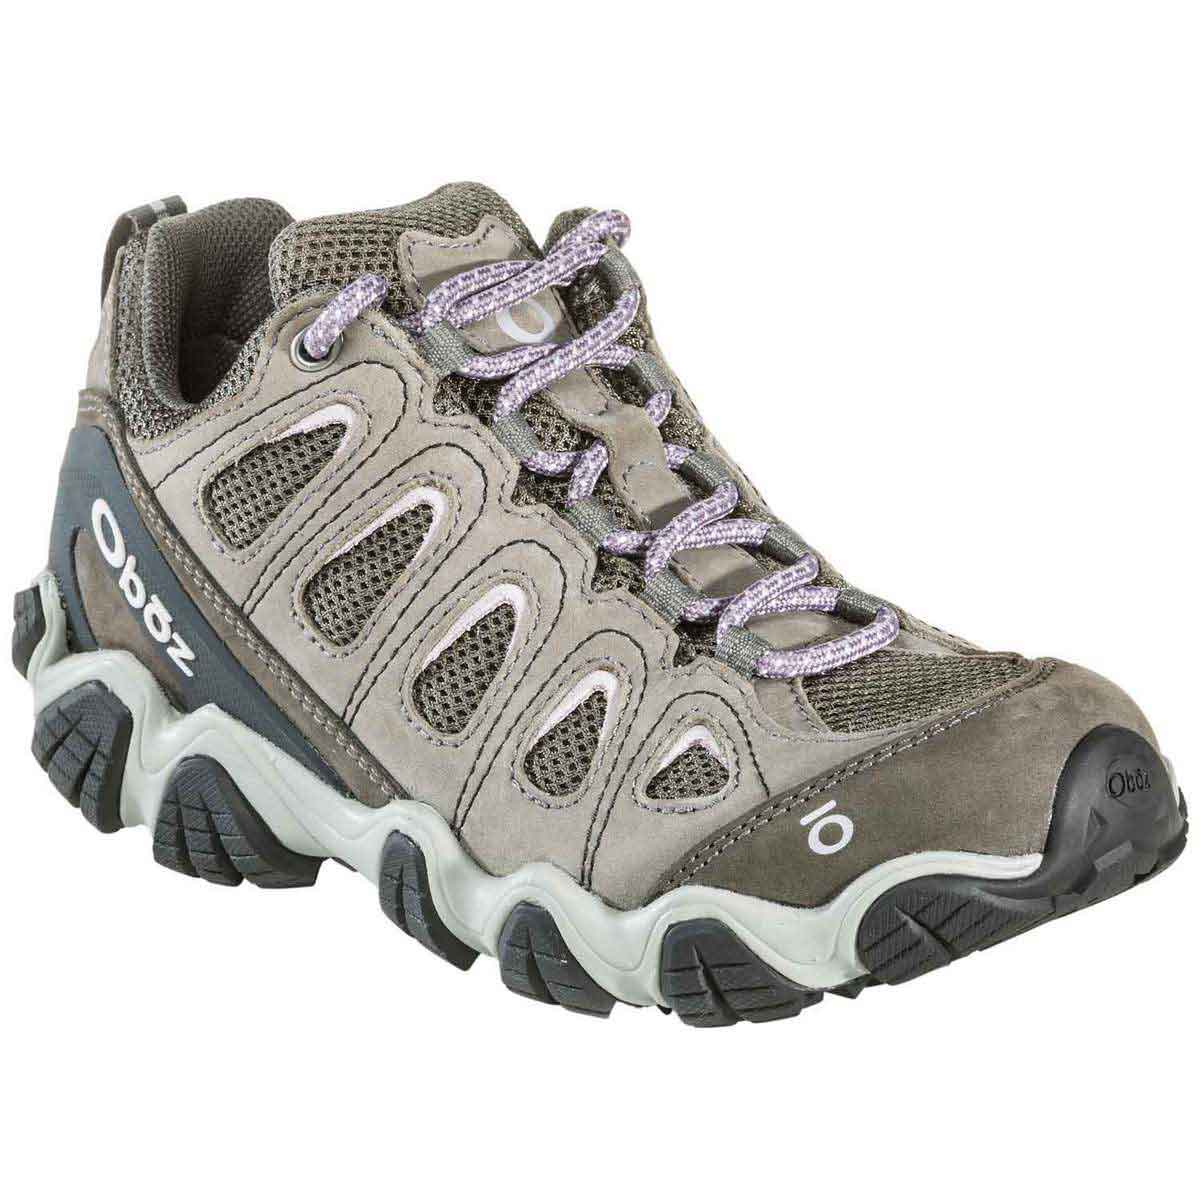 Best Selling Women's Hiking Boots